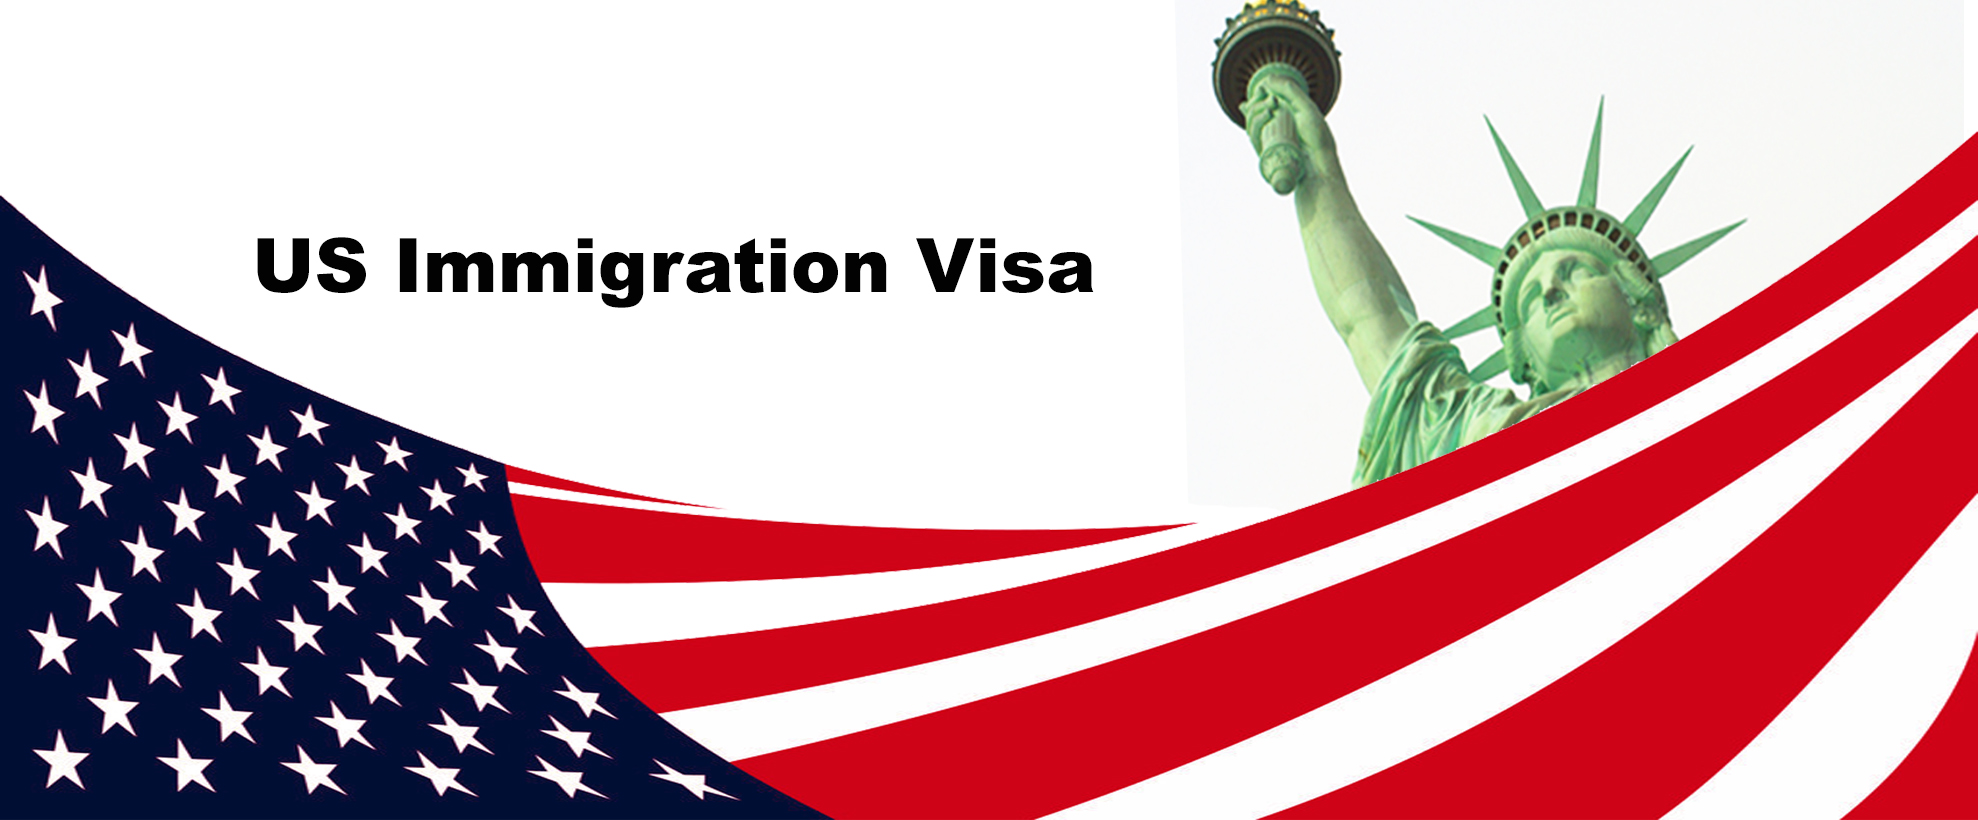 Conditions Needed for Fulfilling the Visa Requirements